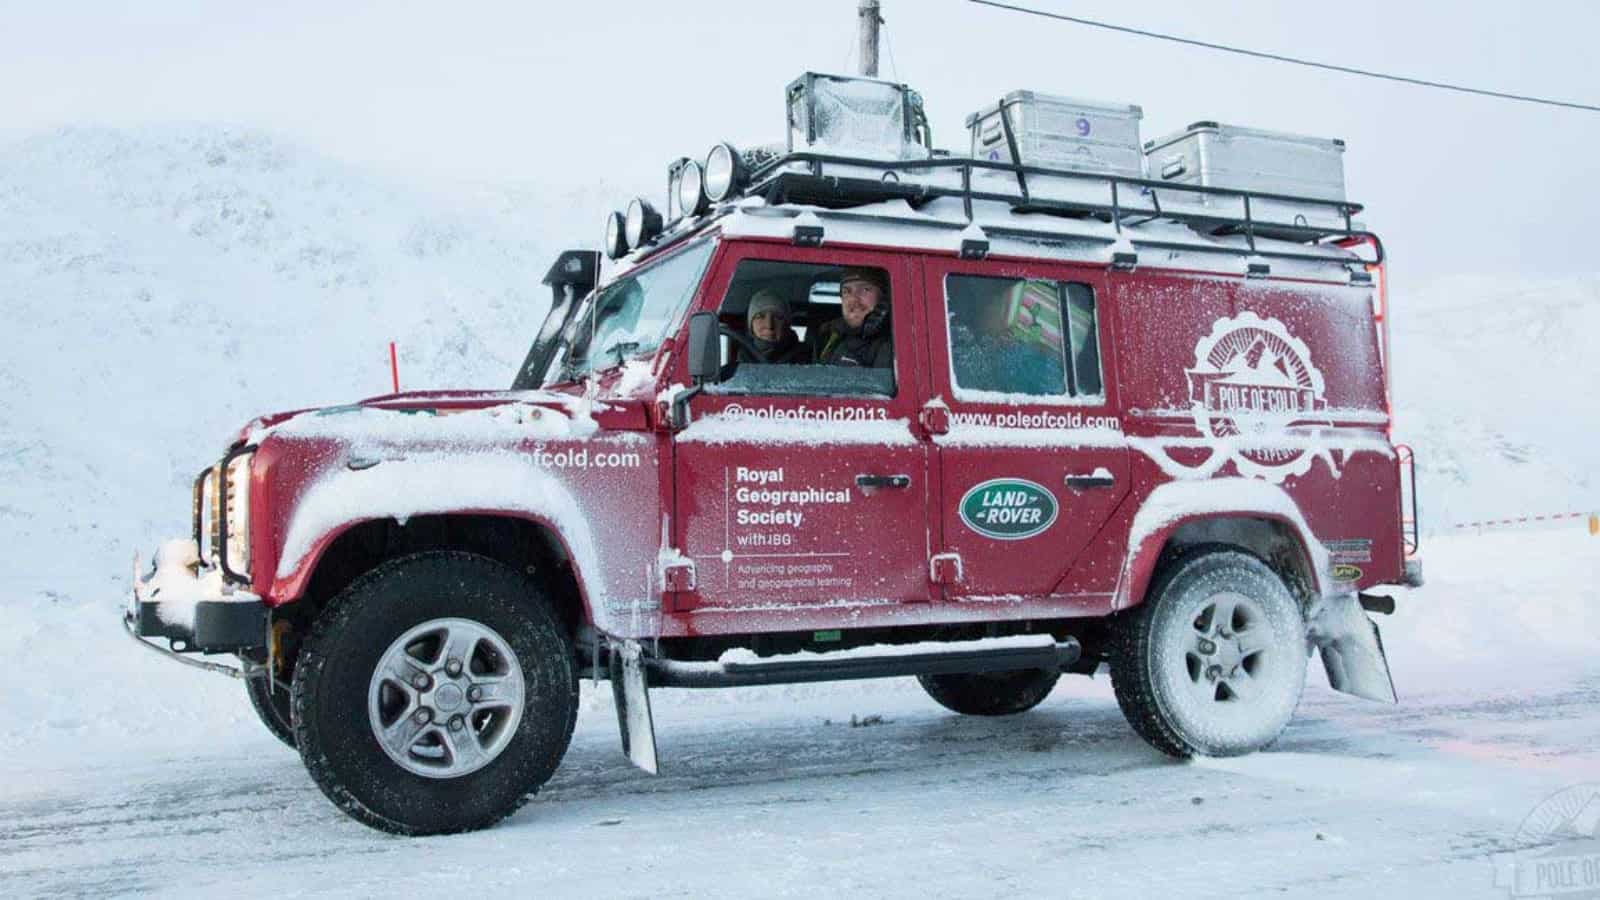 Land Rover Branded With The Royal Geographical Society Driving Through Snow